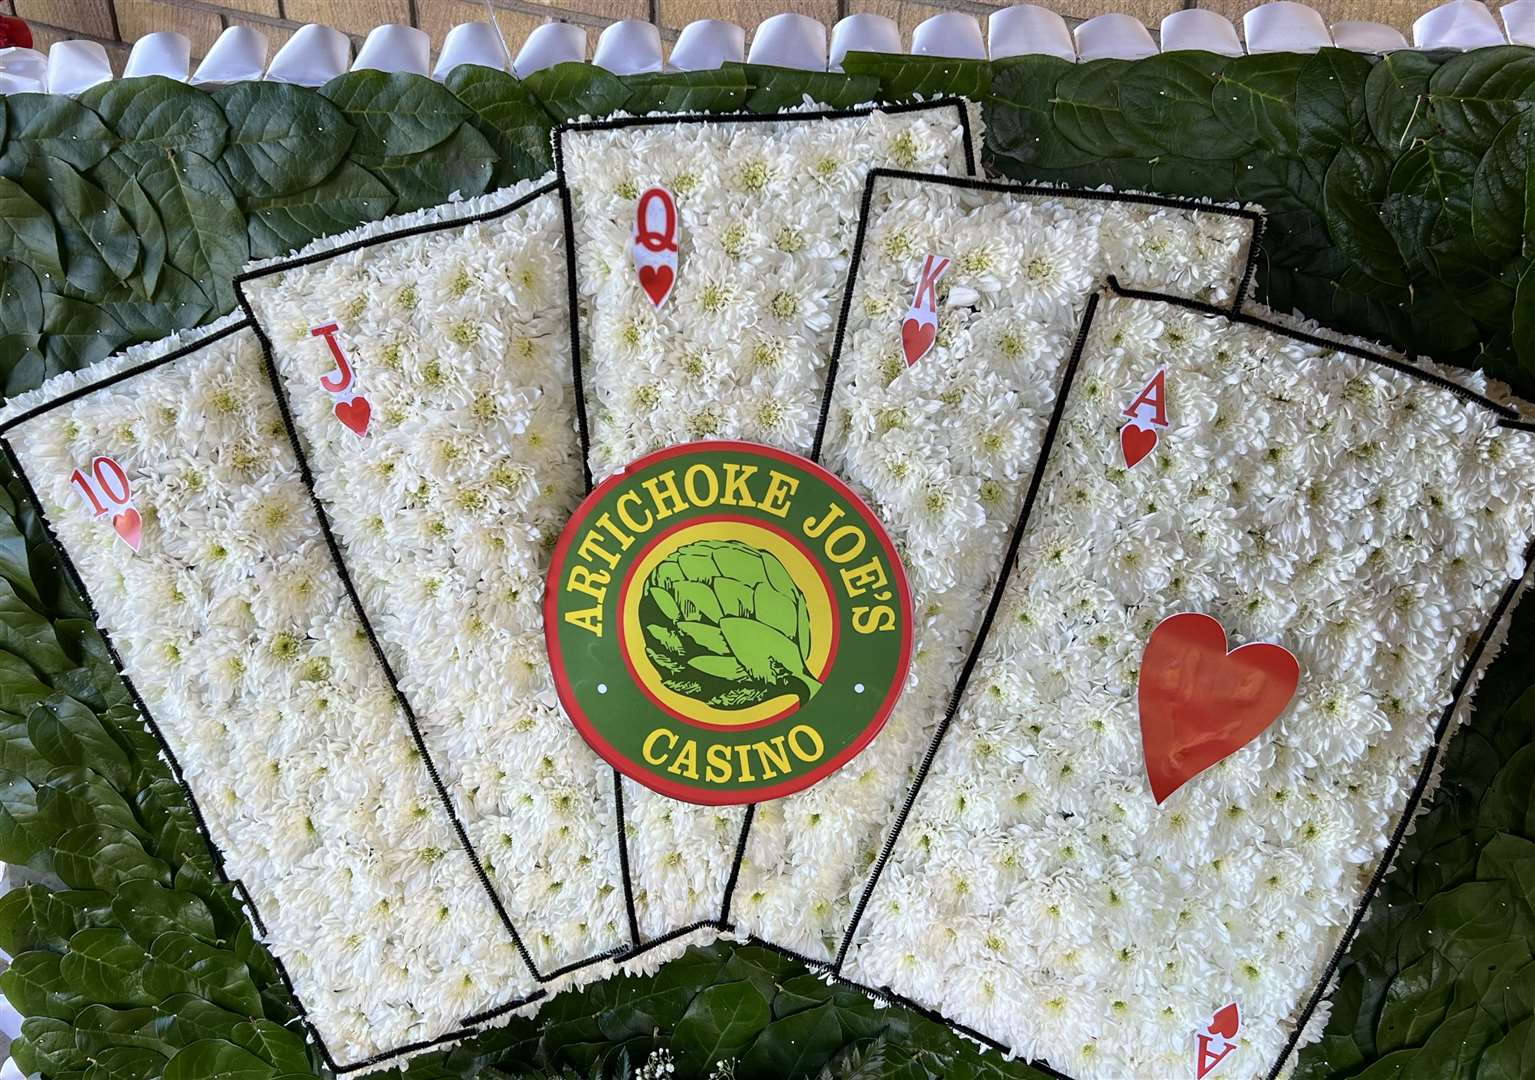 This design showed a love for Artichoke Joe's Casino which is based in the United States. Picture: Barry Goodwin